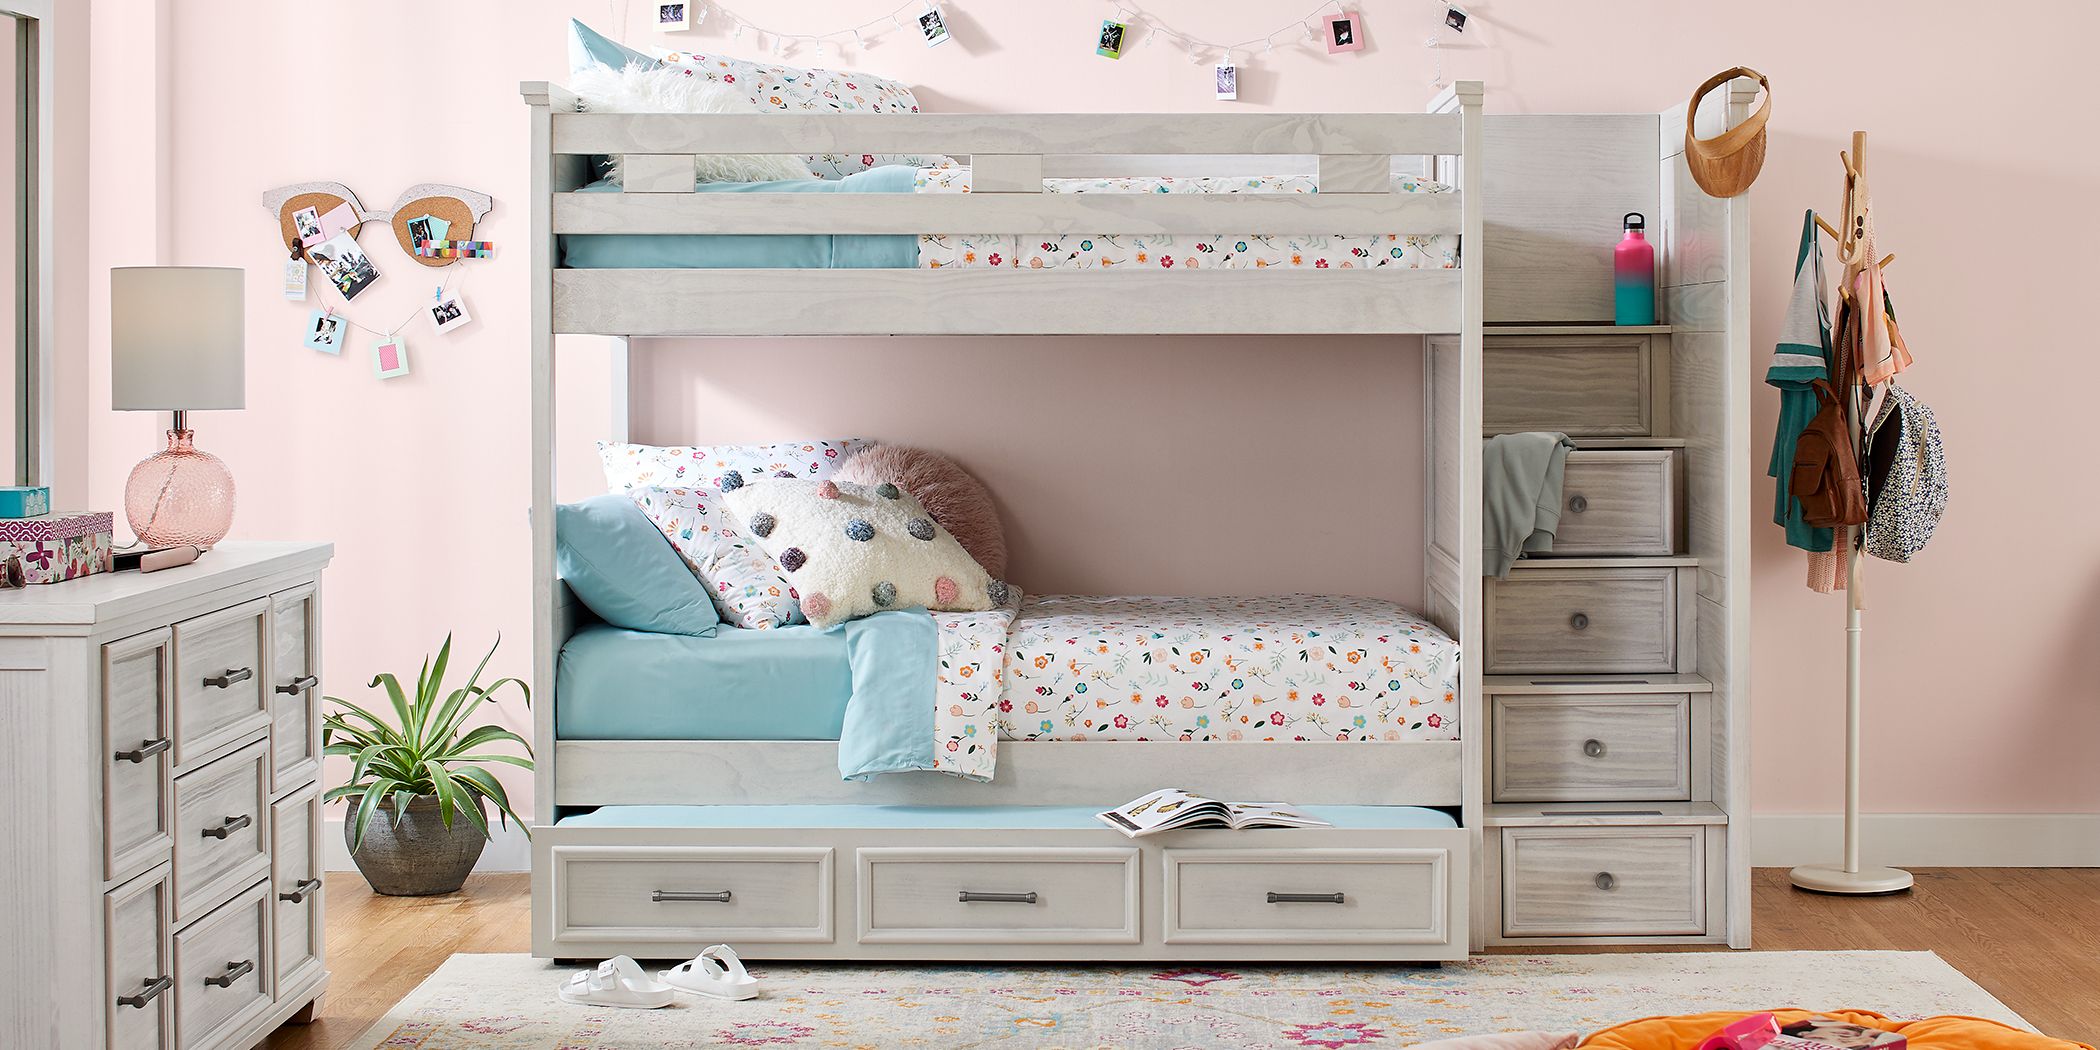 Bunk Beds With Storage Space, Childrens Bunk Beds With Shelves